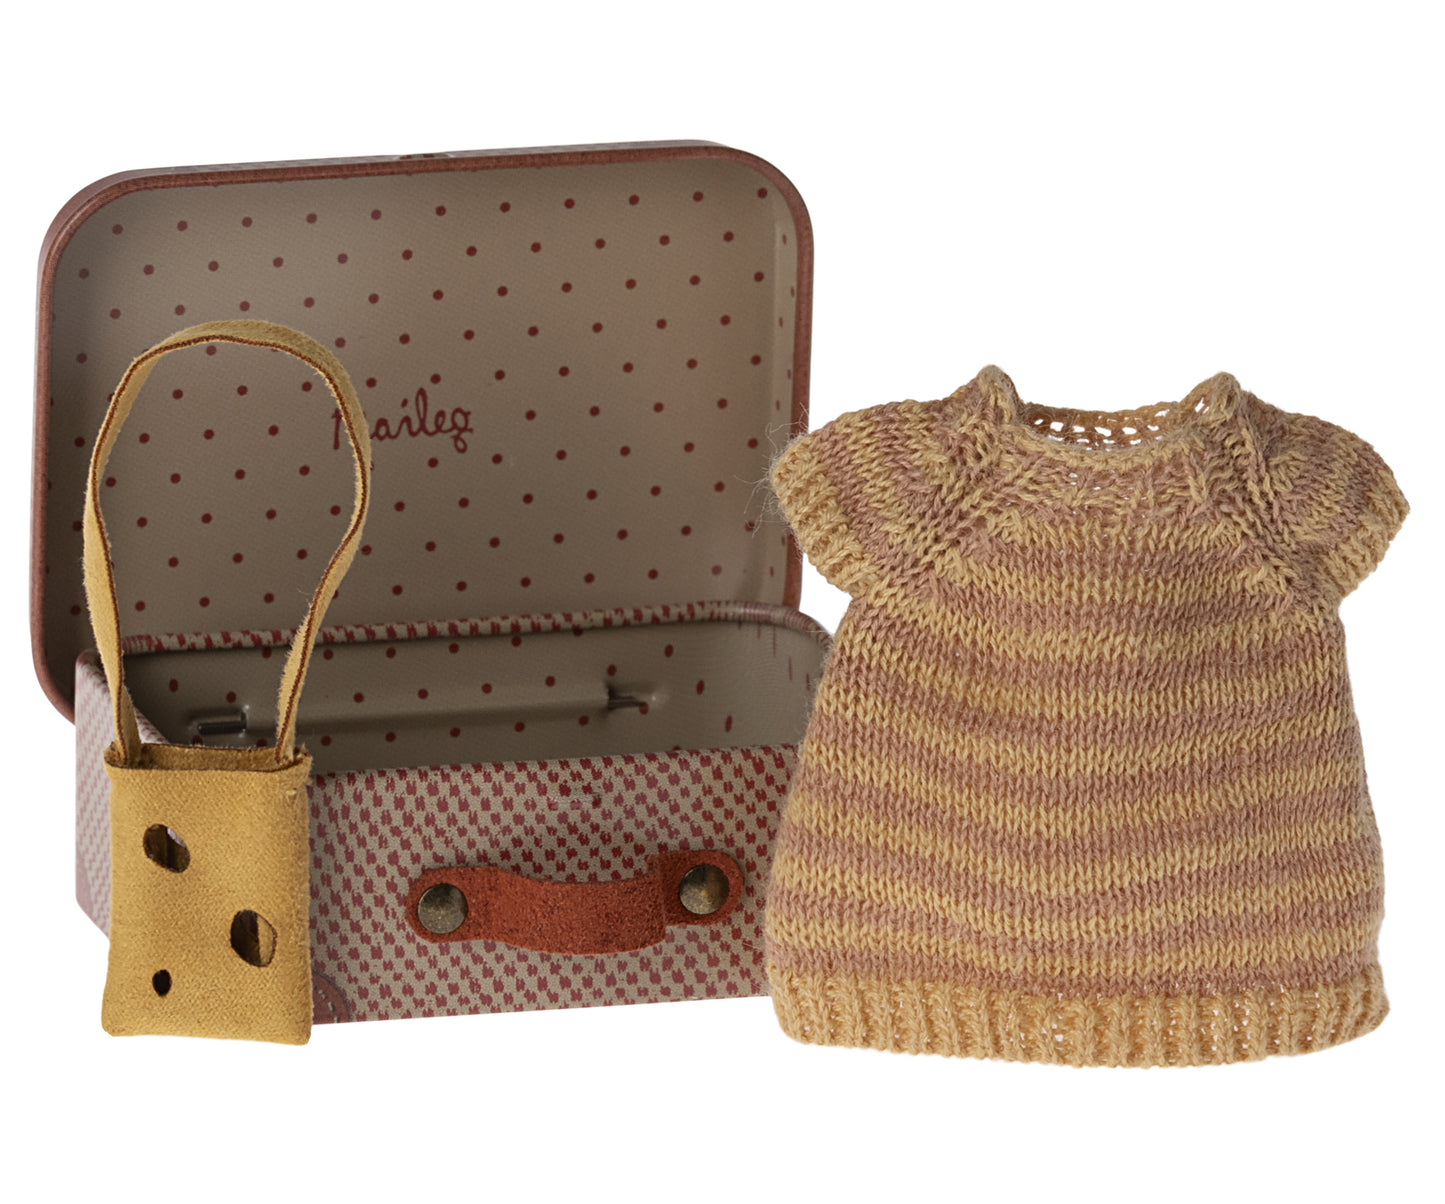 *PRE-ORDER* - Maileg Knitted Dress & Bag In Suitcase, Big Sister Mouse - *ESTIMATED ARRIVAL MID APRIL 2024*